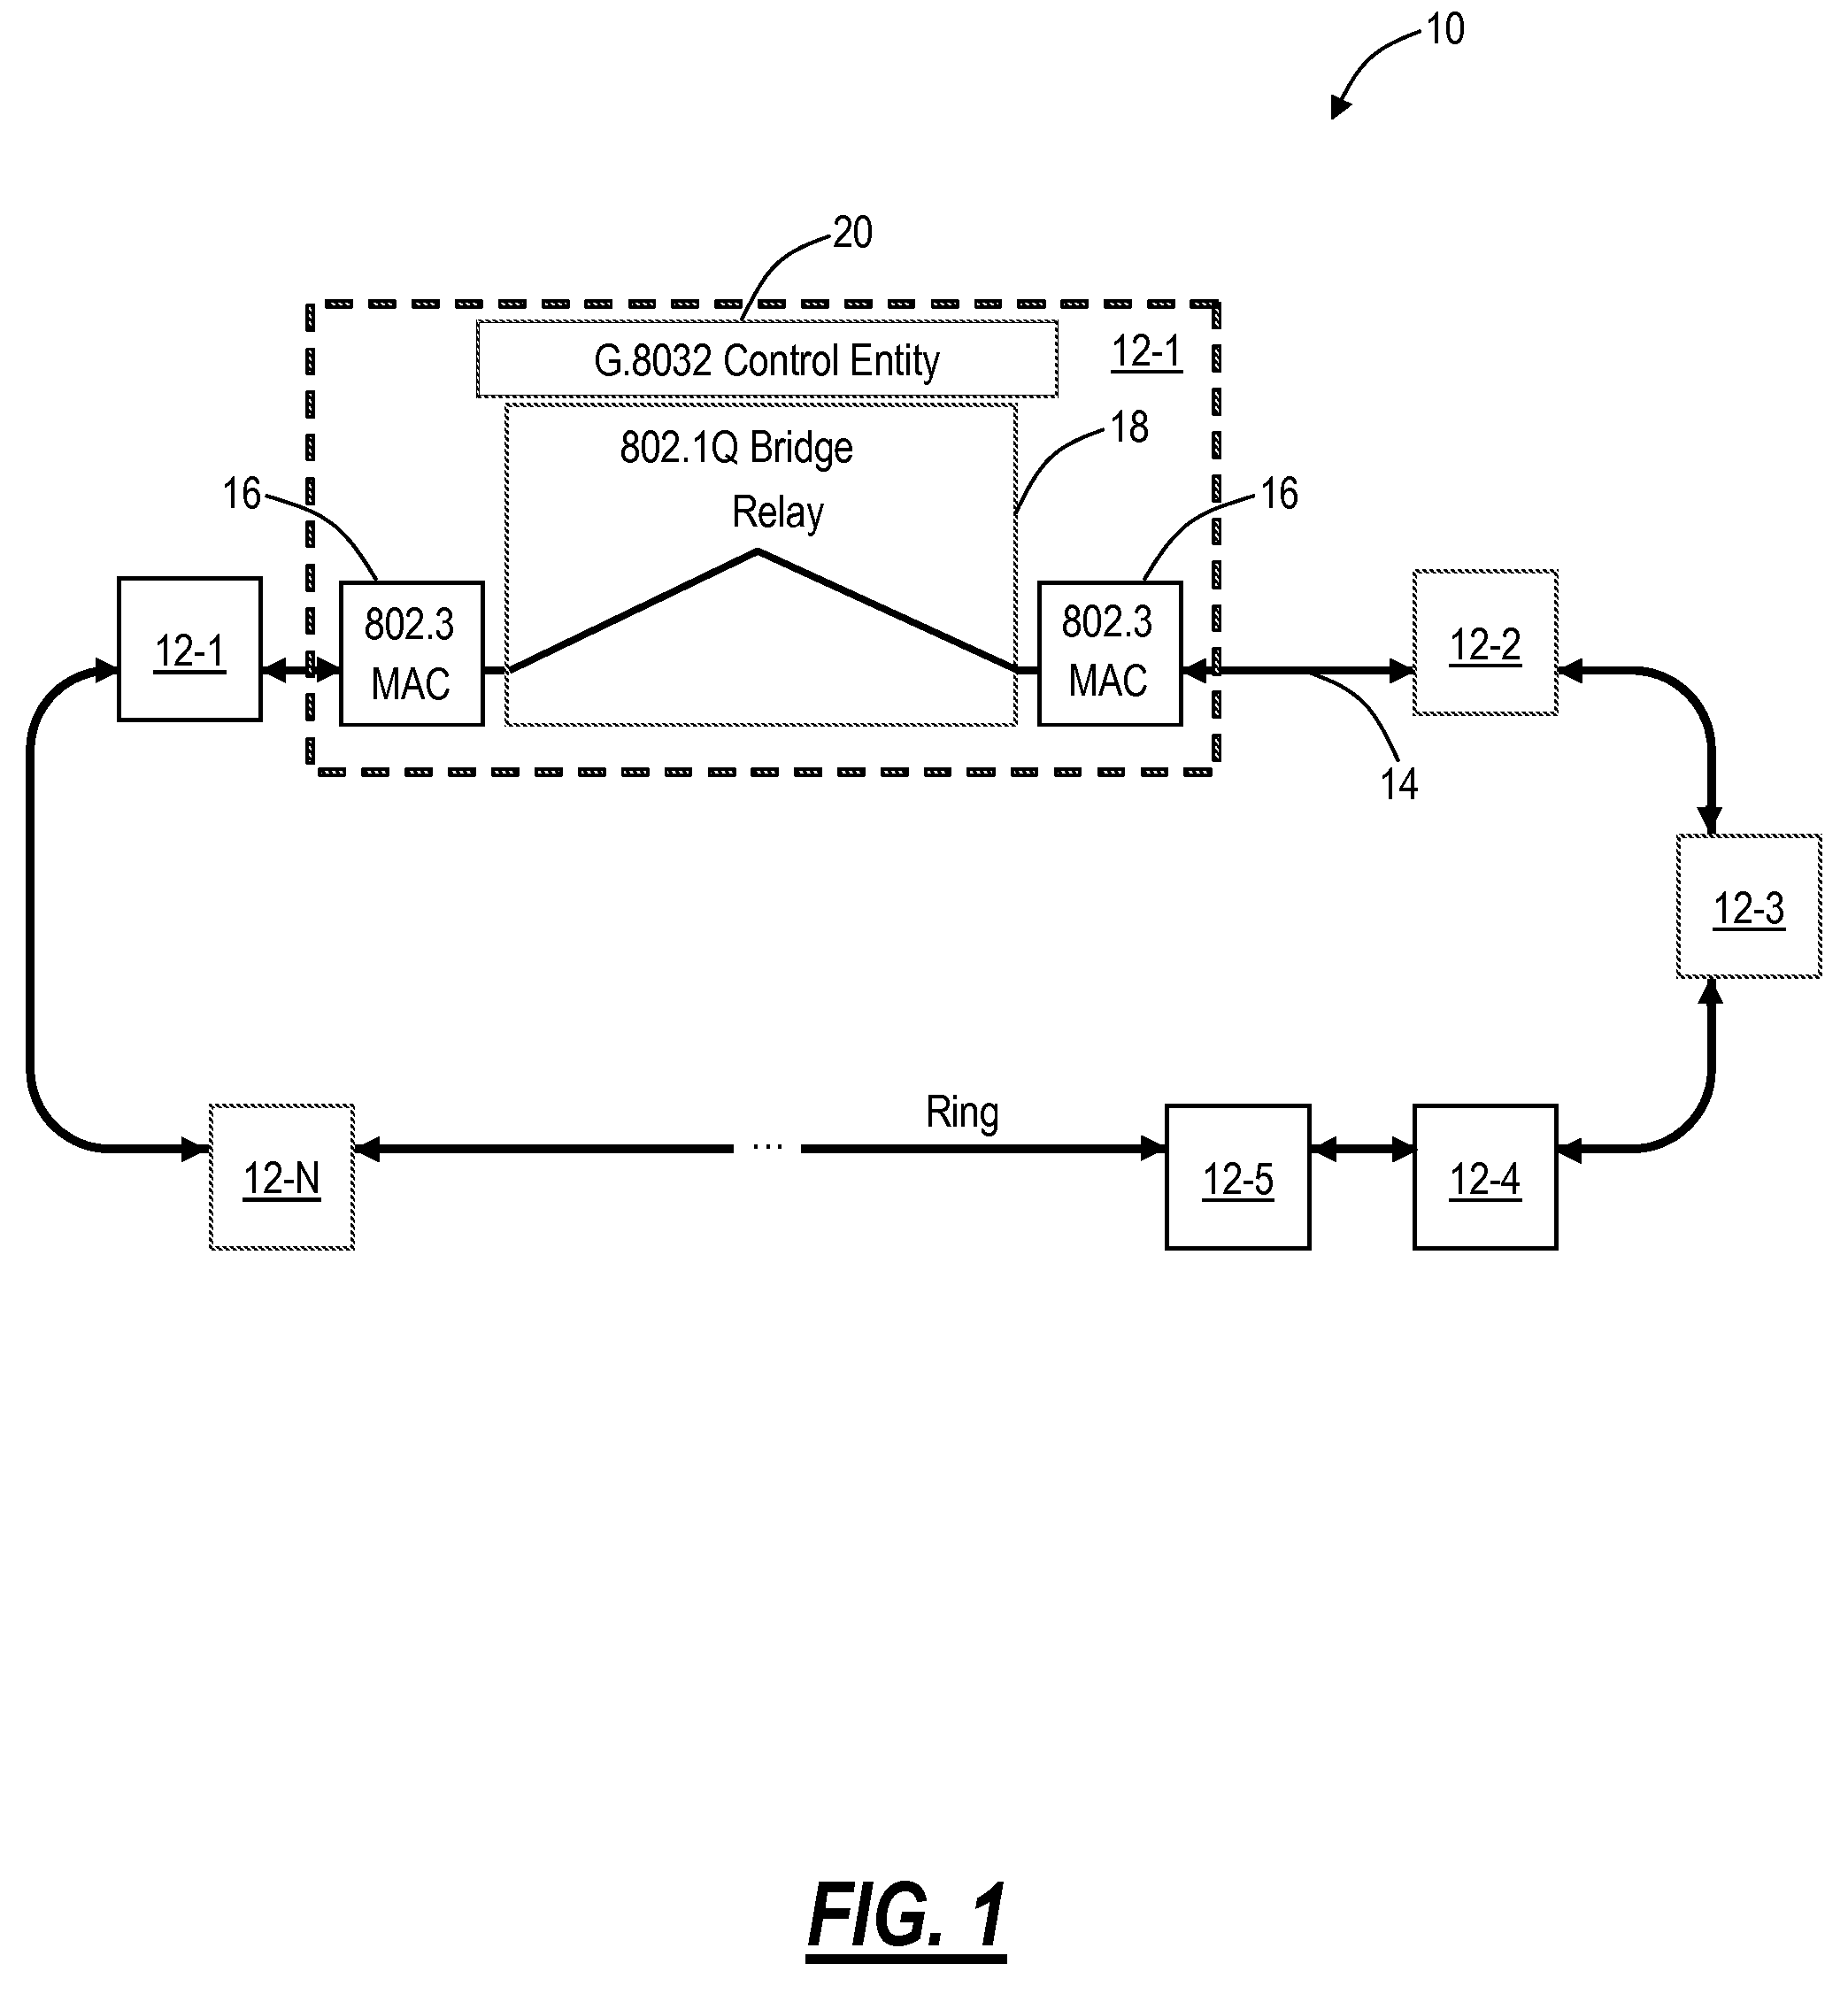 Generalized service protection systems and methods